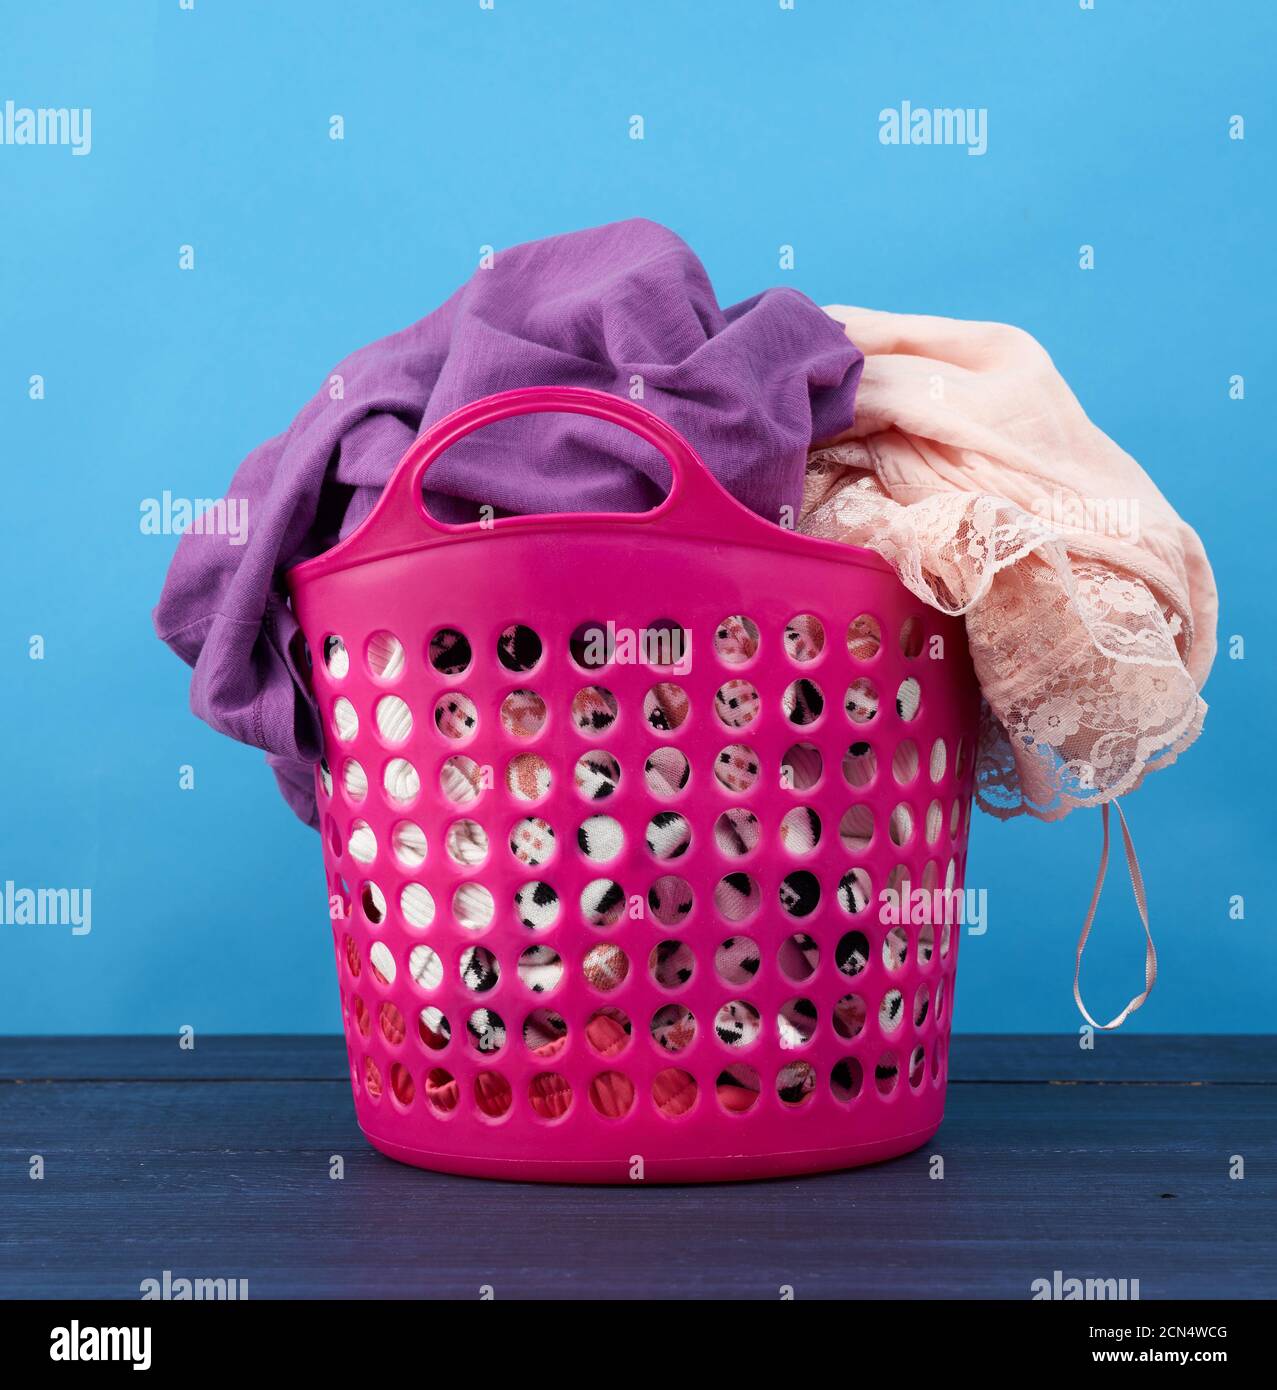 pink plastic basket full of clothes and linen on a blue background Stock Photo